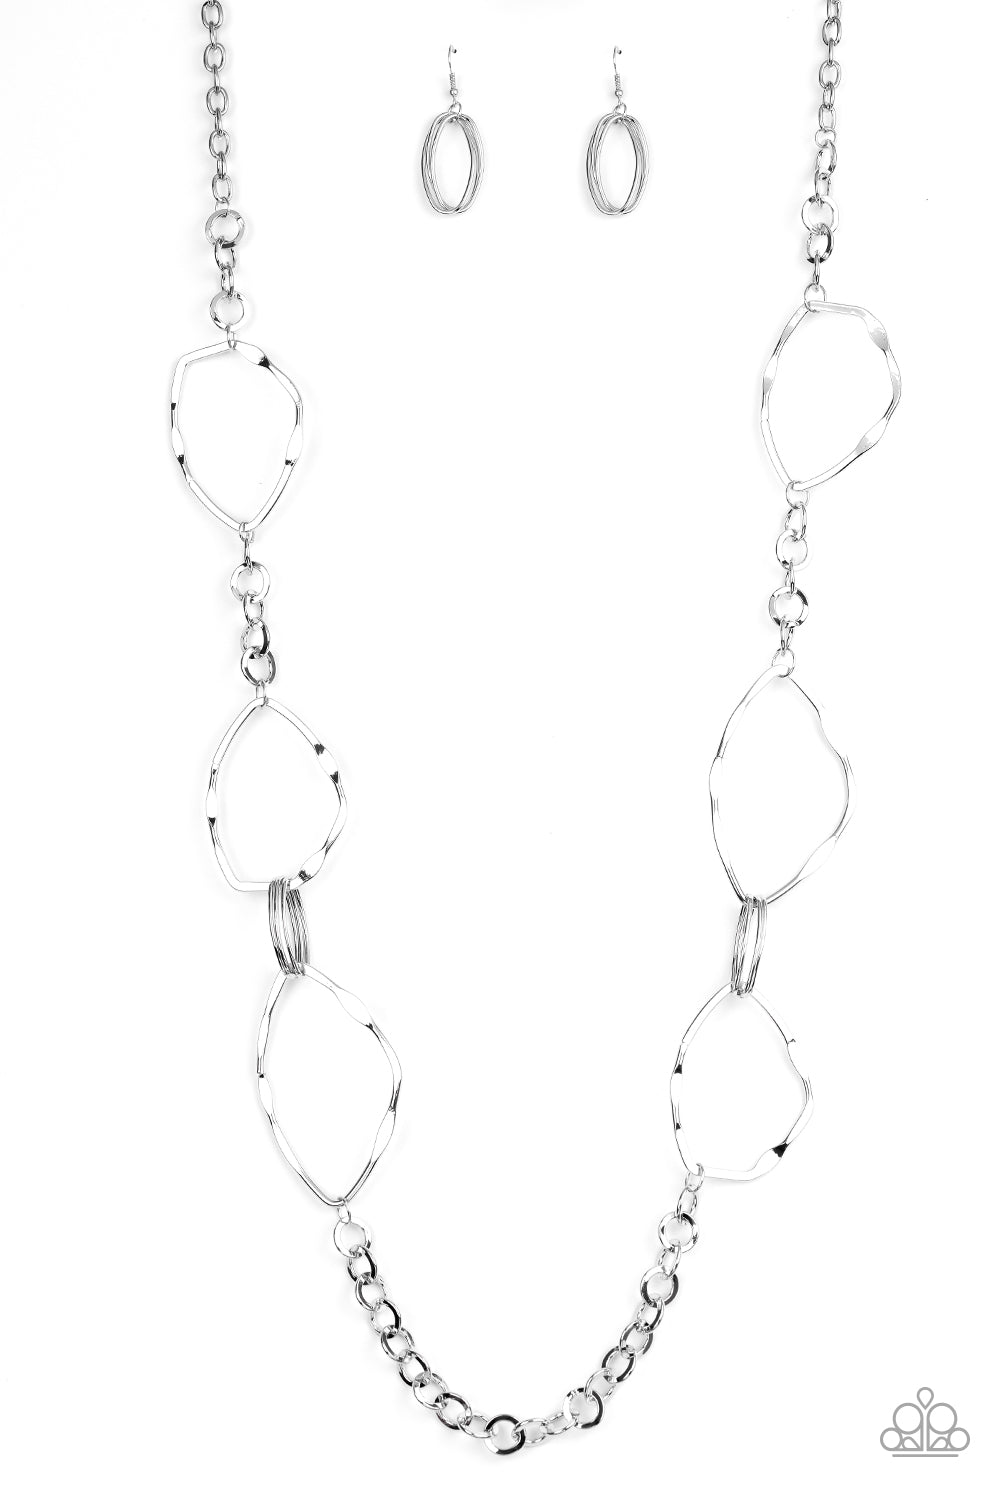 Paparazzi Abstract Artifact - Silver Necklace